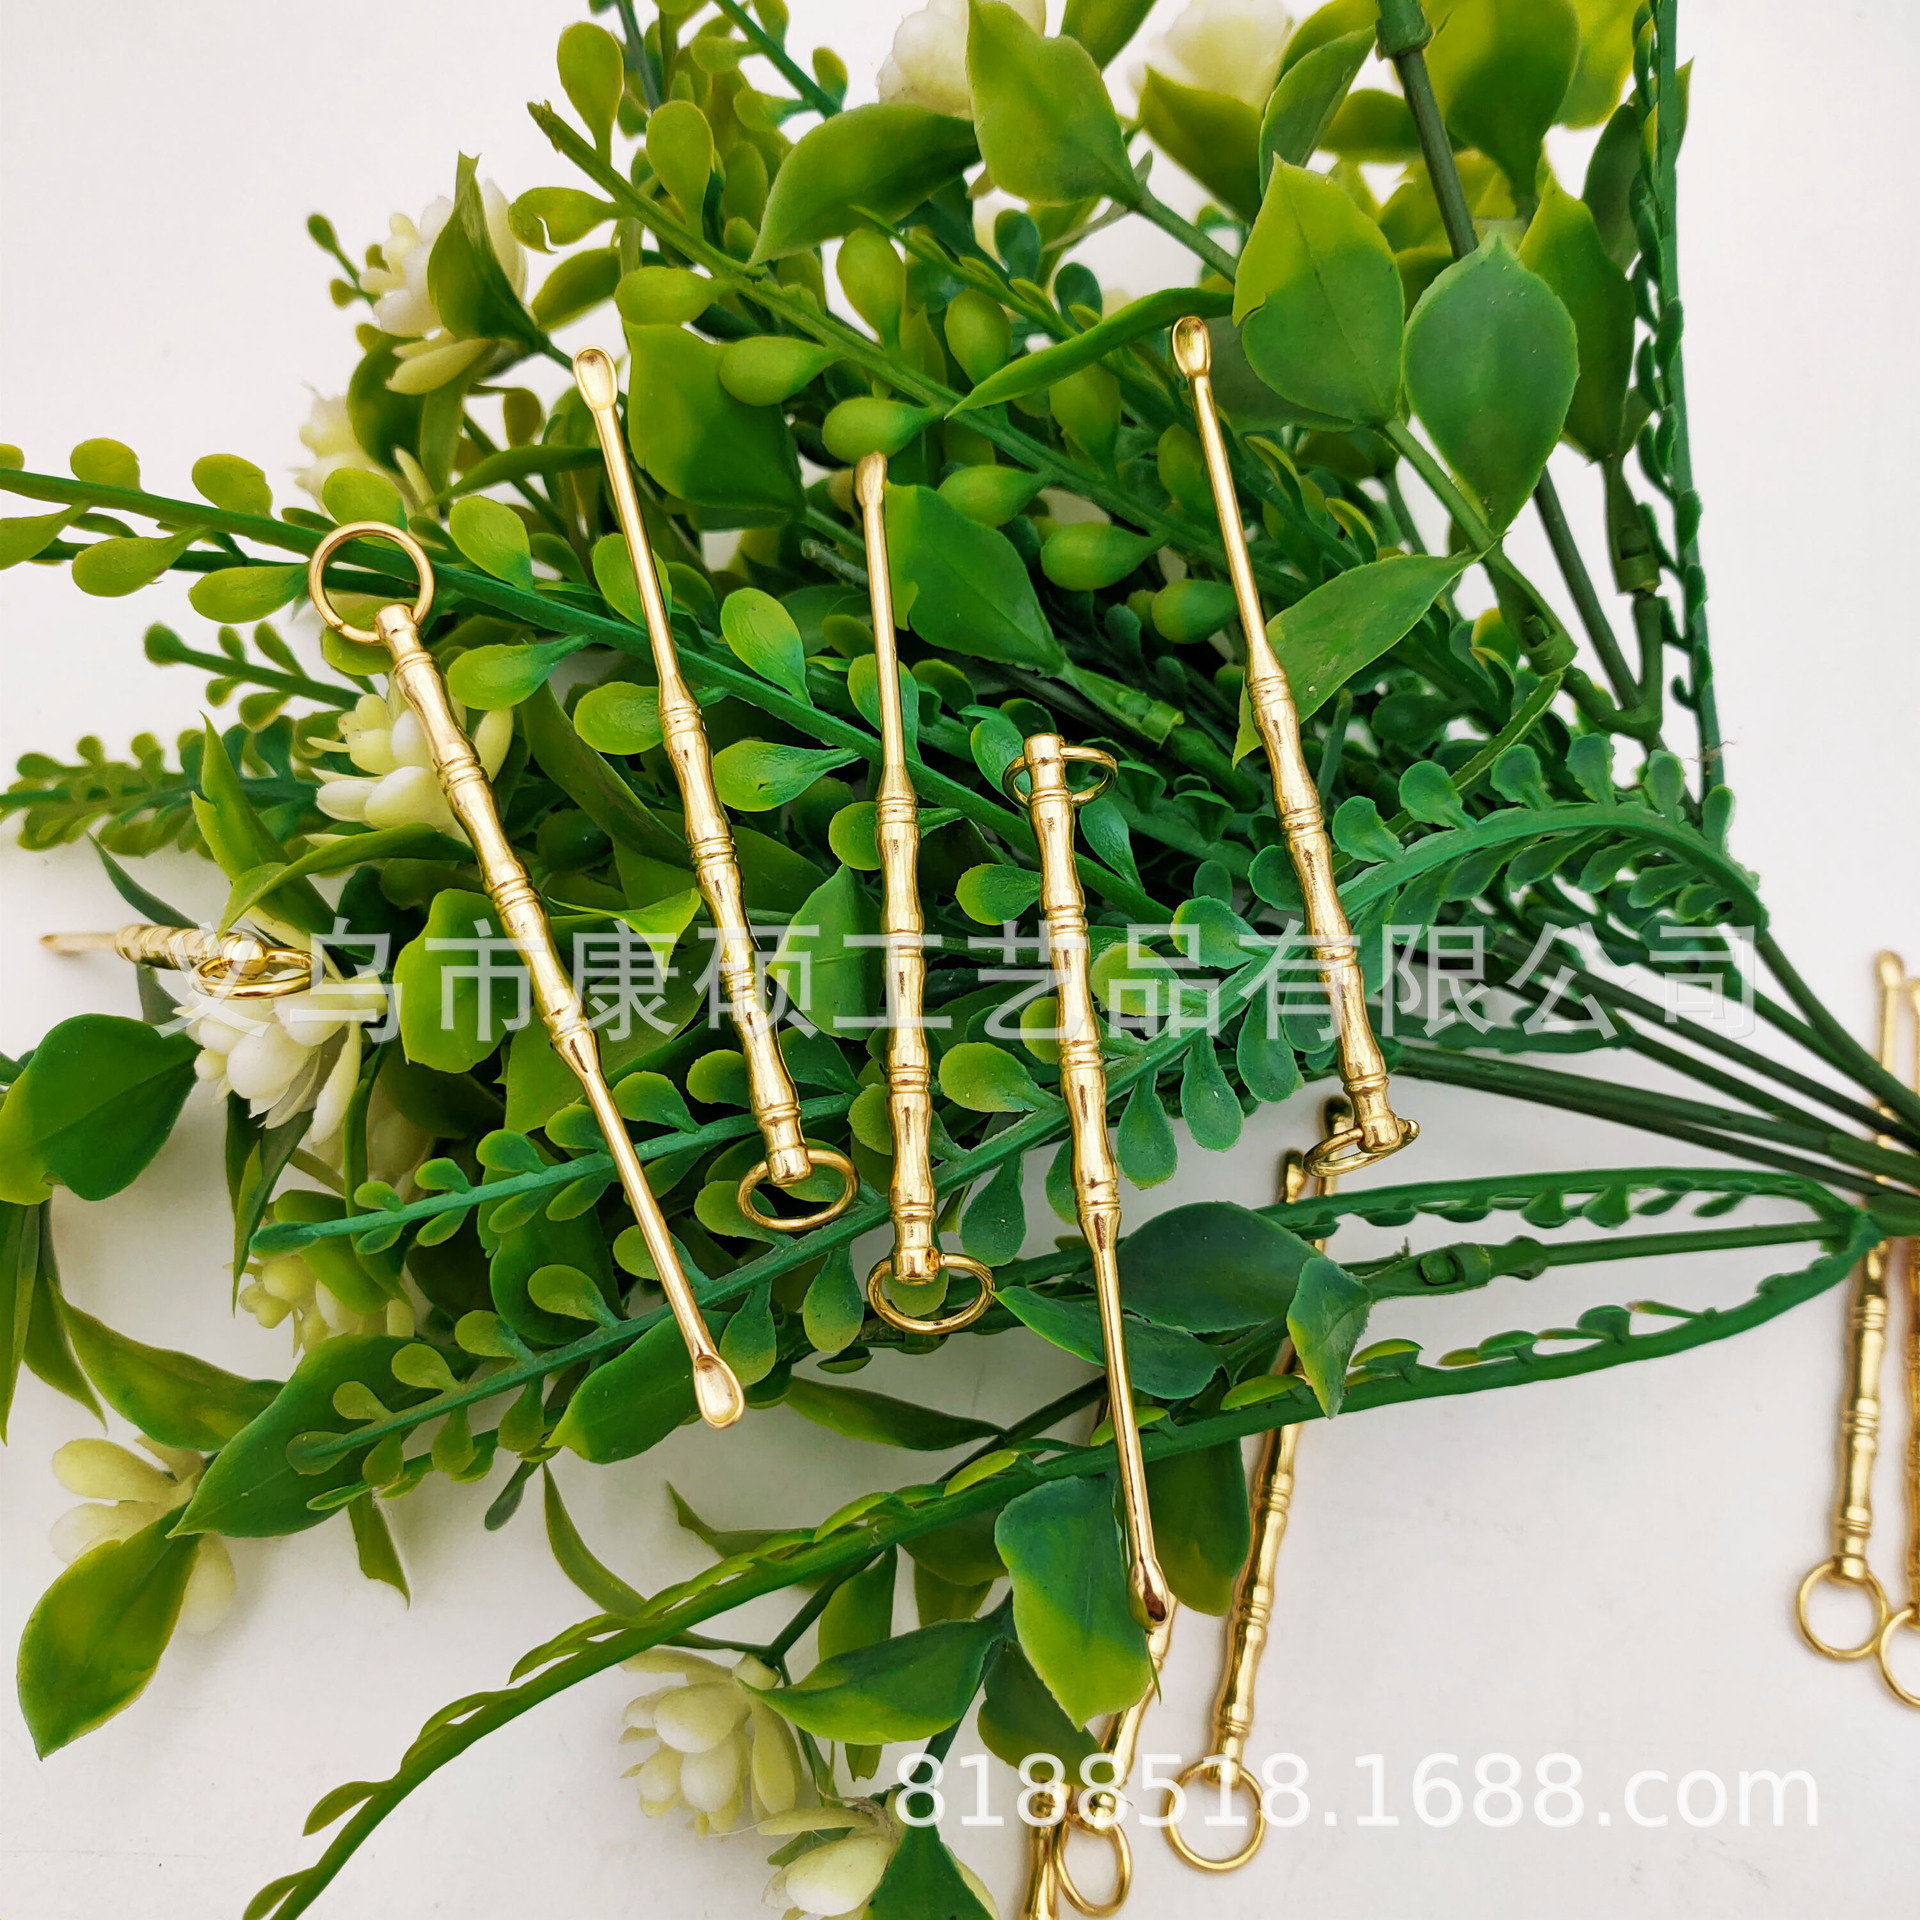 Manufacturer's Large Number of in Stock Wholesale Ear Pick Ear Pick Artifact Imitation Brass Bamboo Joint Ear-Picking Small Gift Live Broadcast with Goods